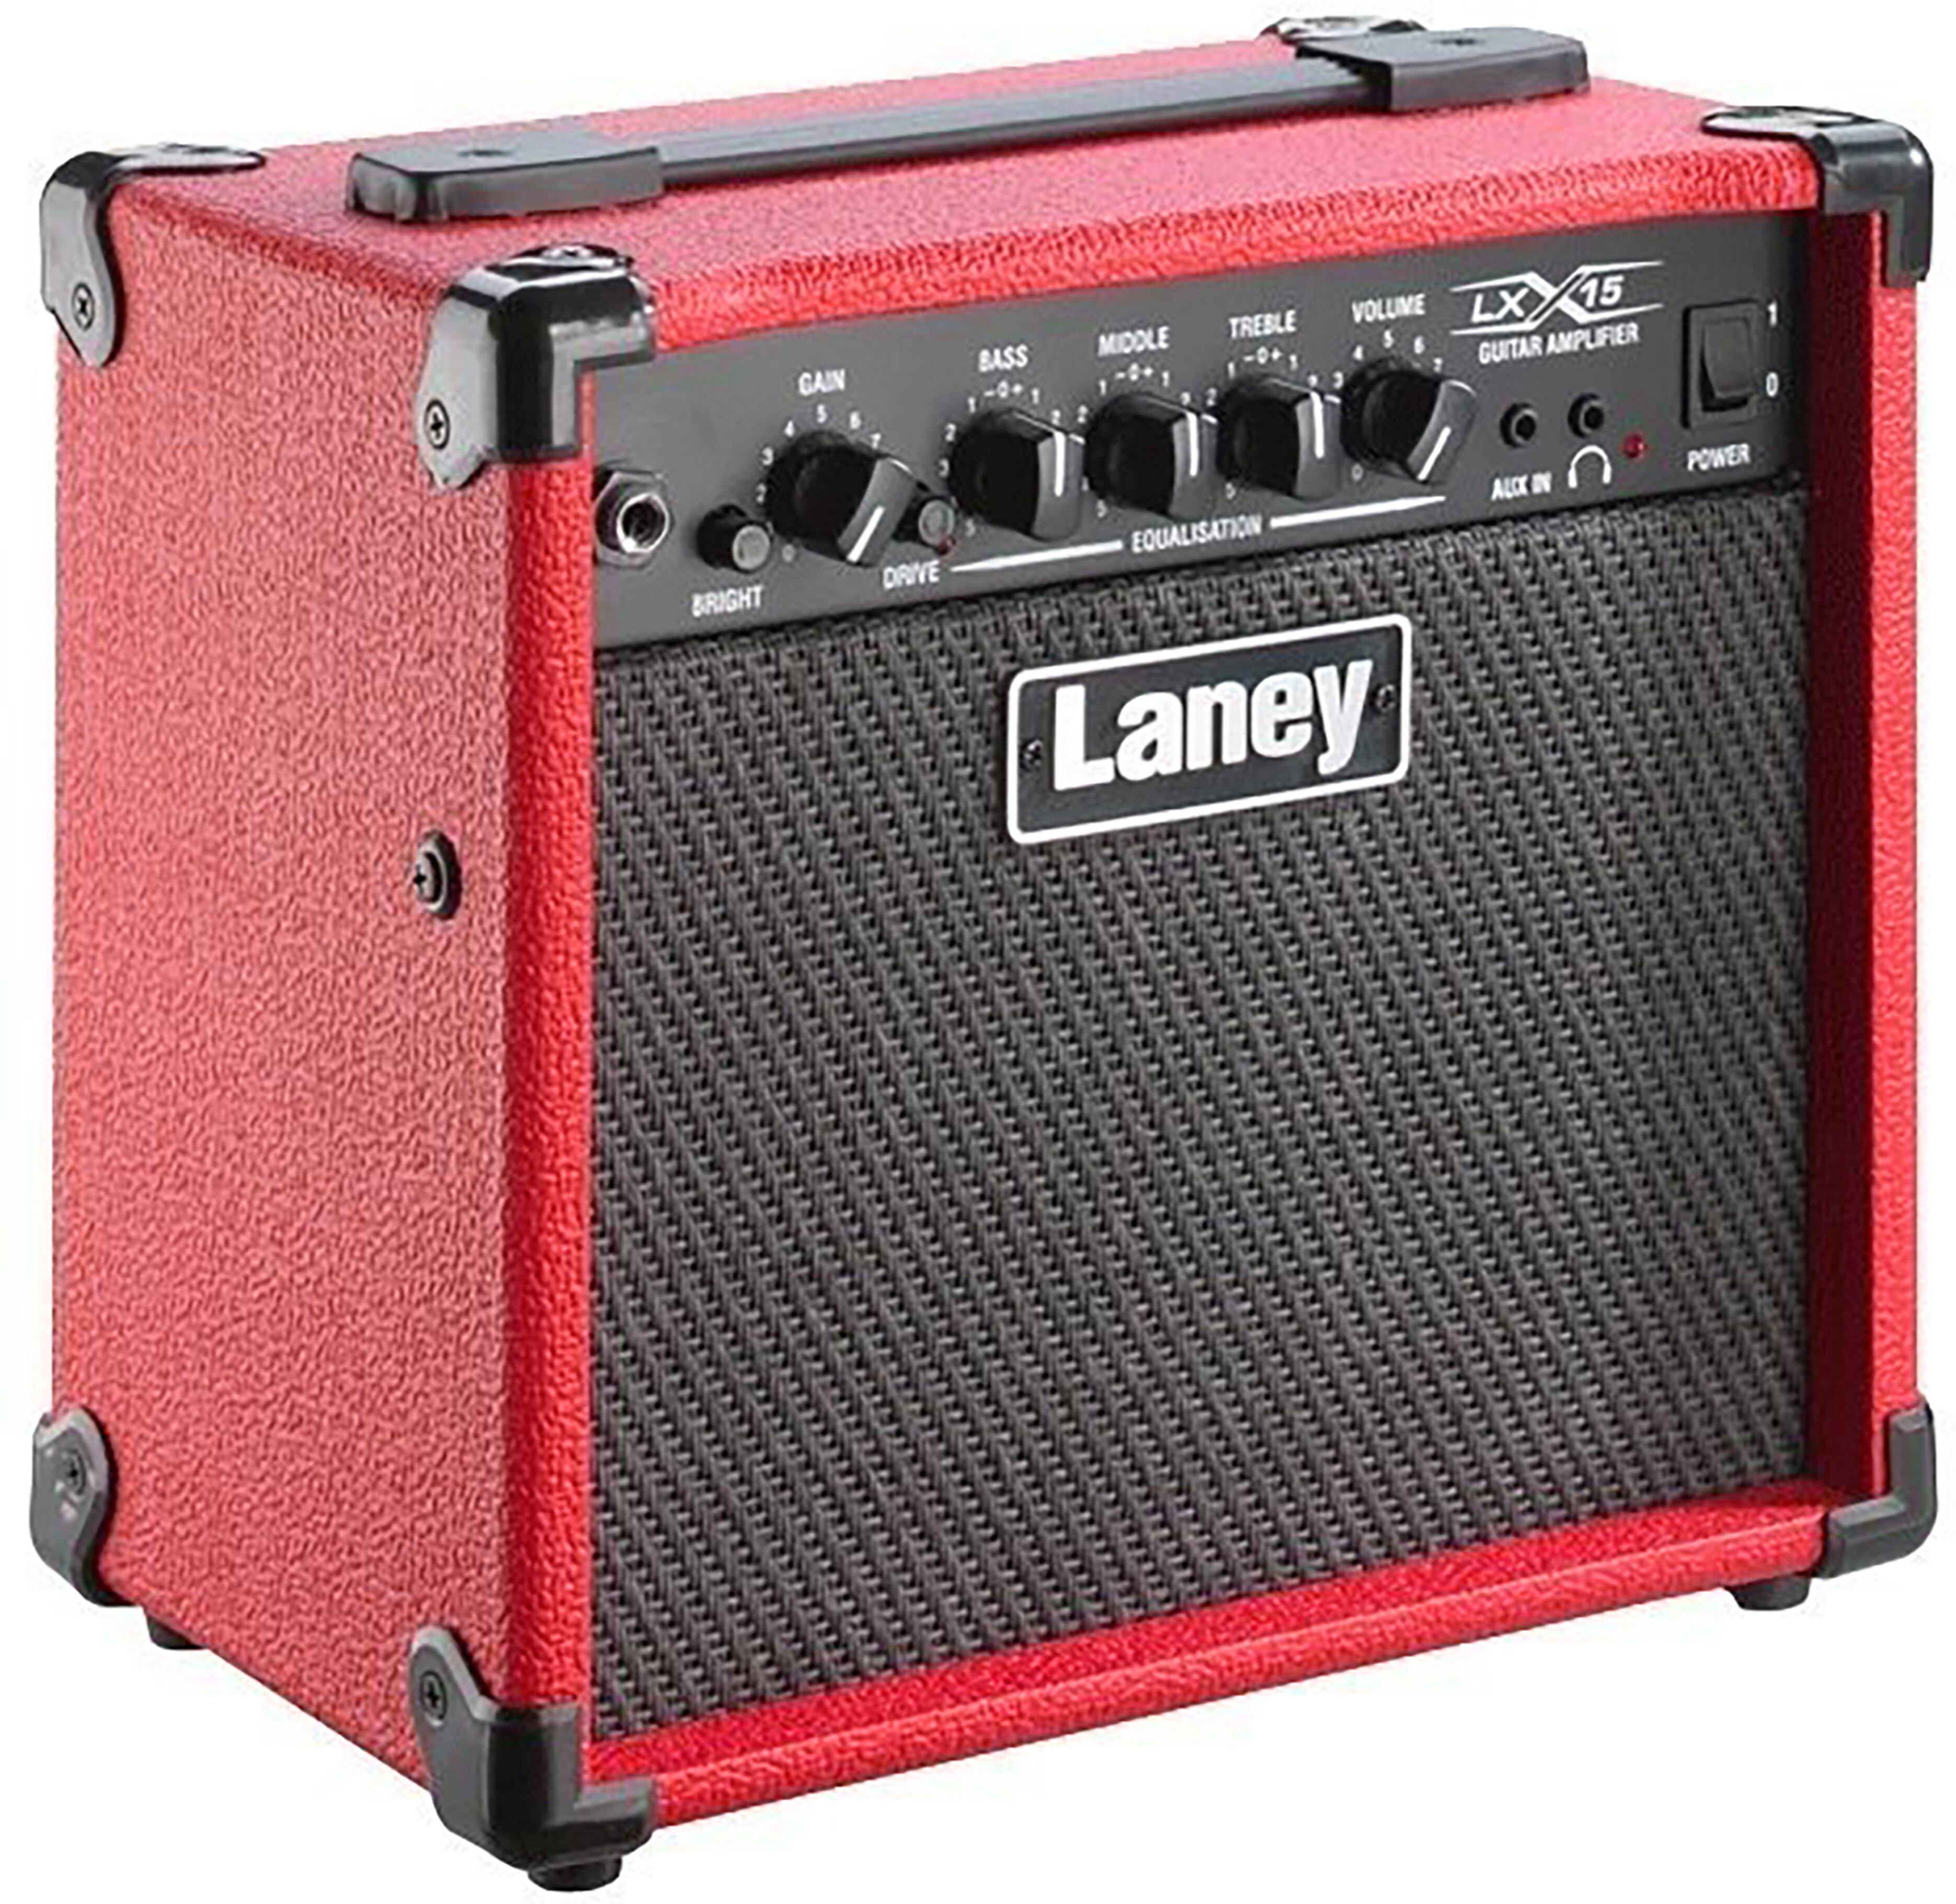 Laney LX15 Guitar Combo 2x5in 15 Watts Red -  LX15-RED